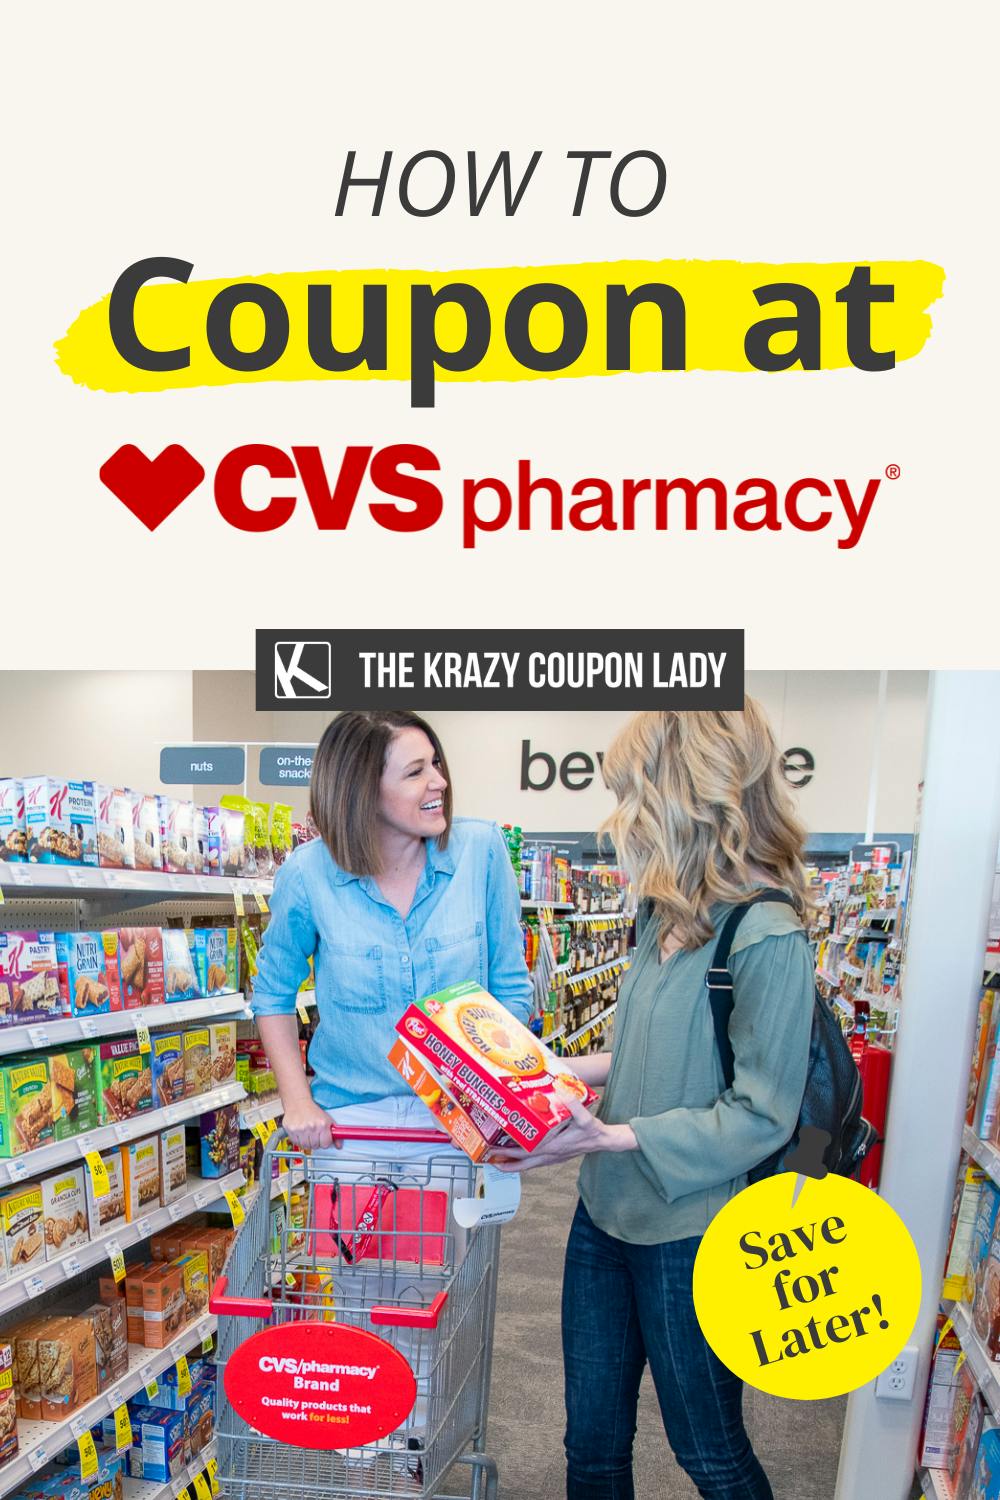 THIS Is How to Coupon at CVS